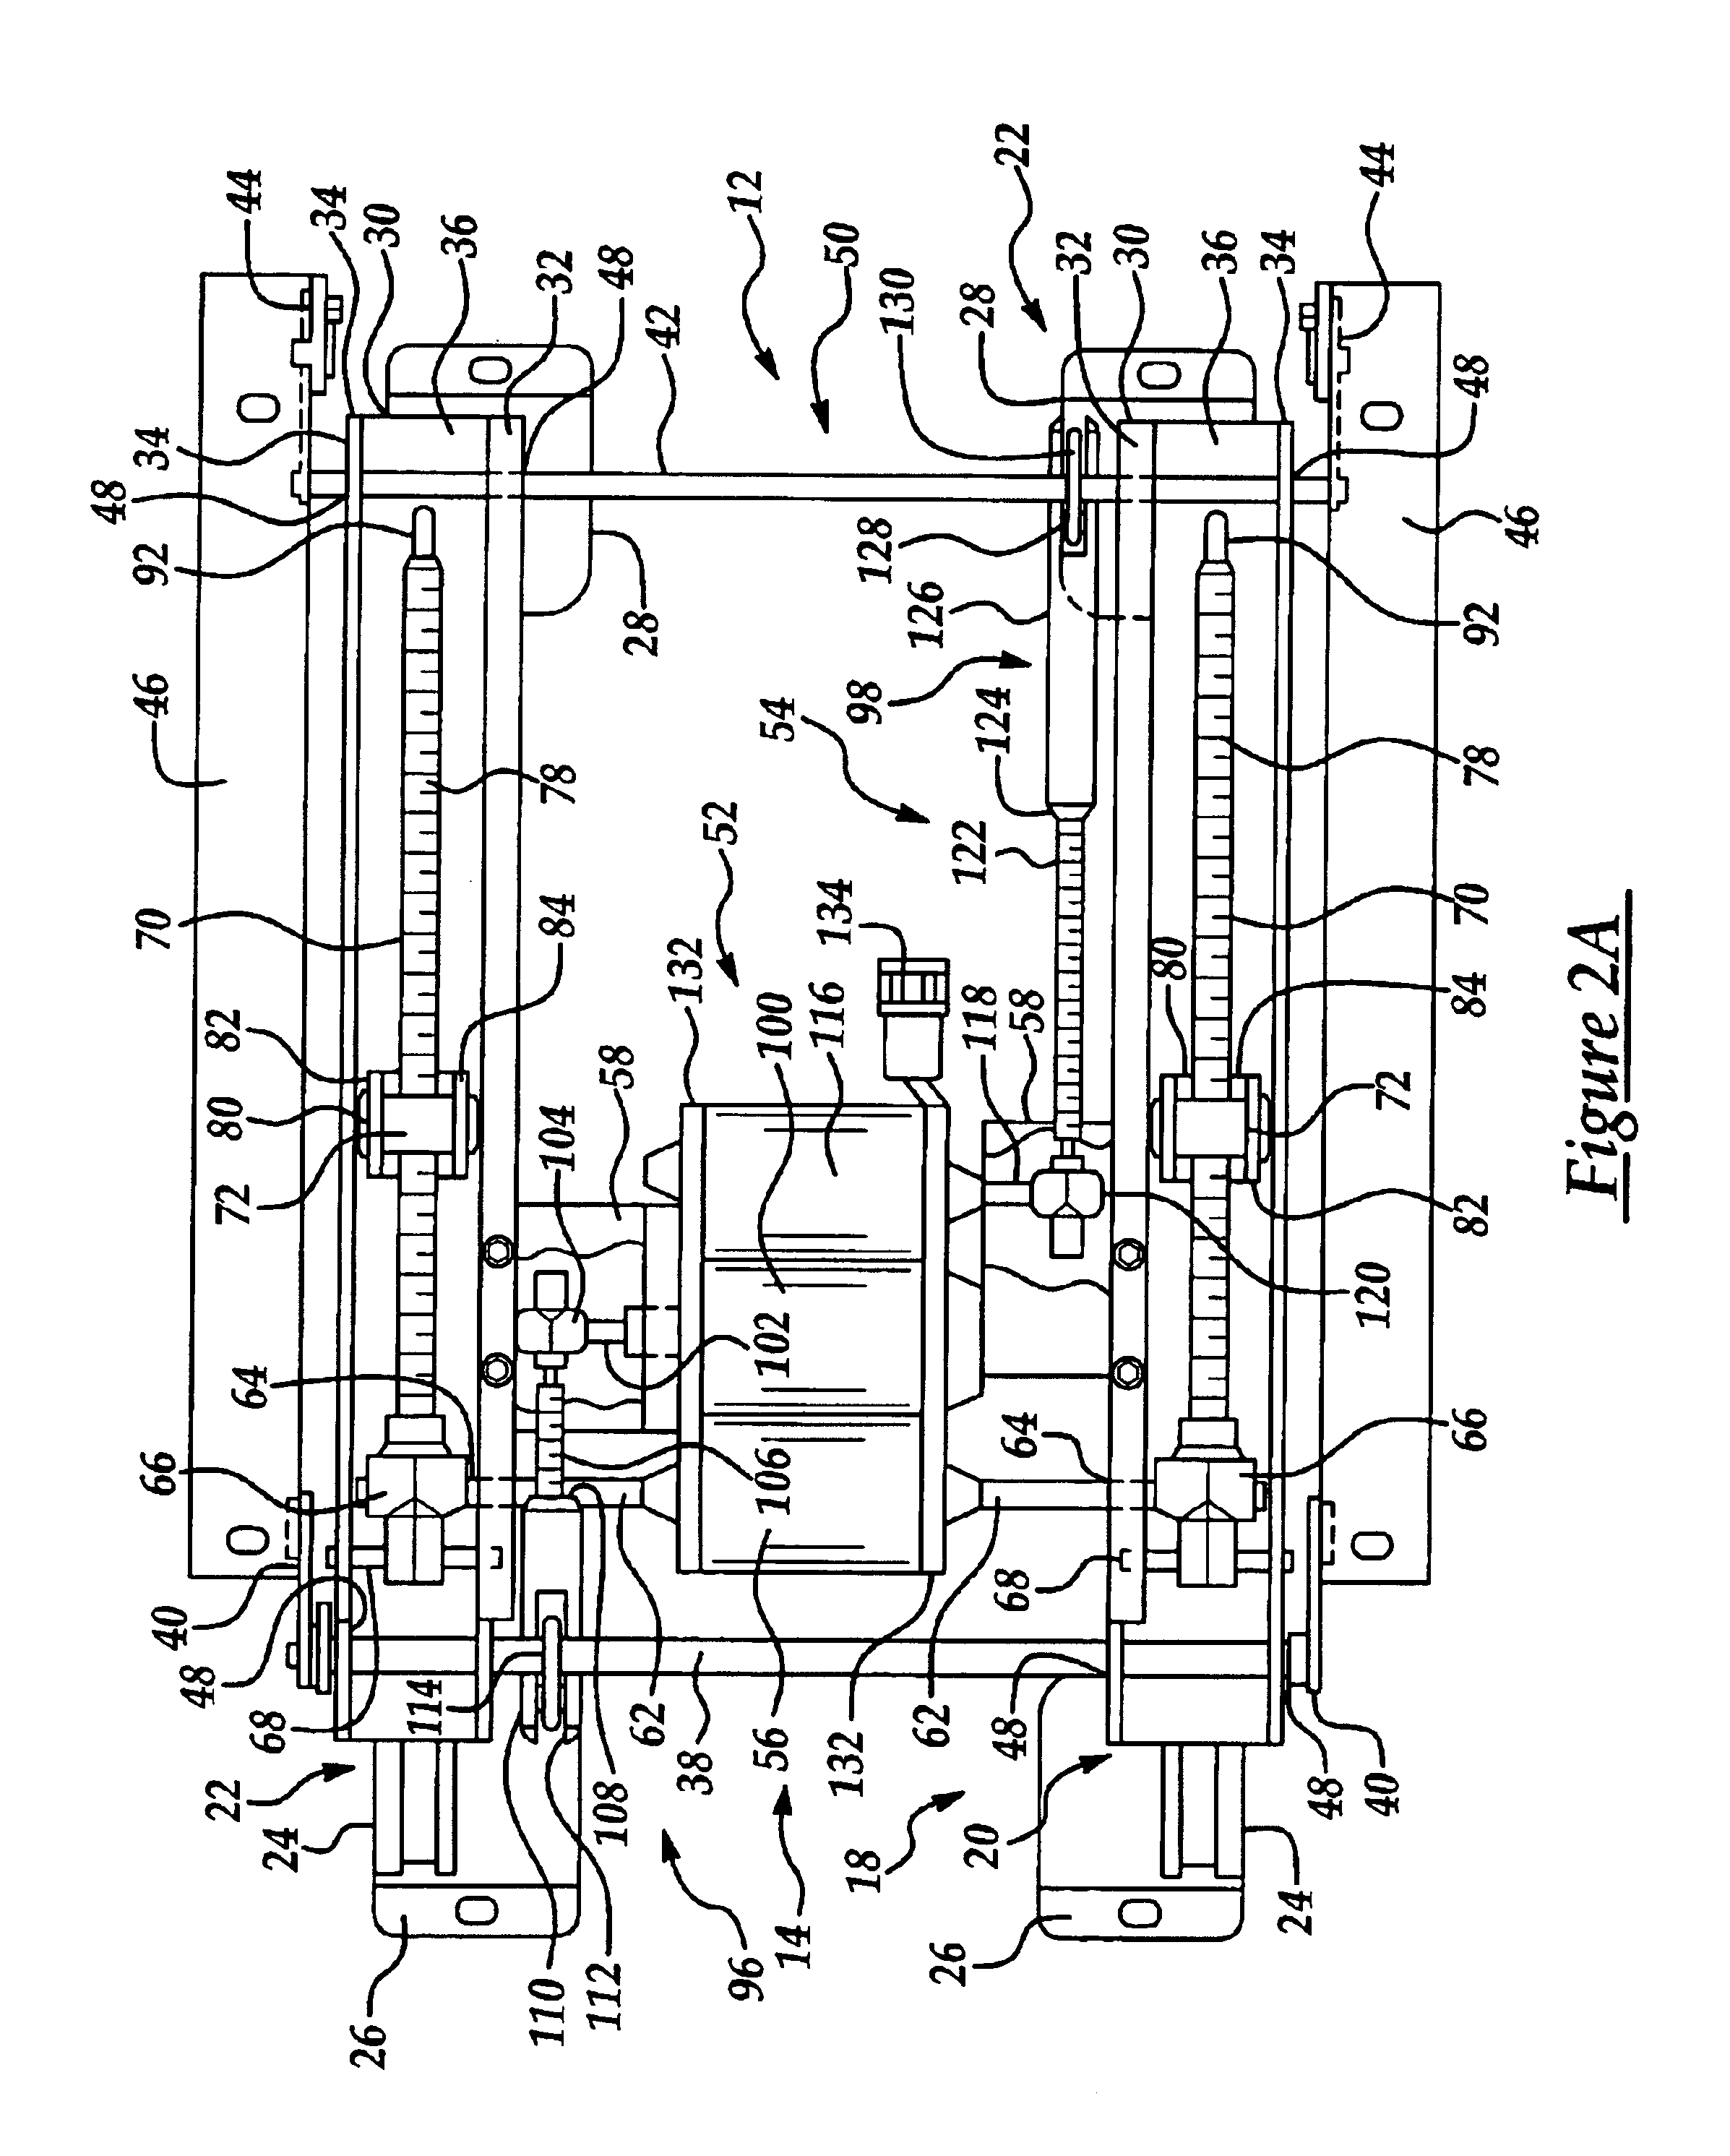 Automotive seat assembly having a self-clearing drive nut